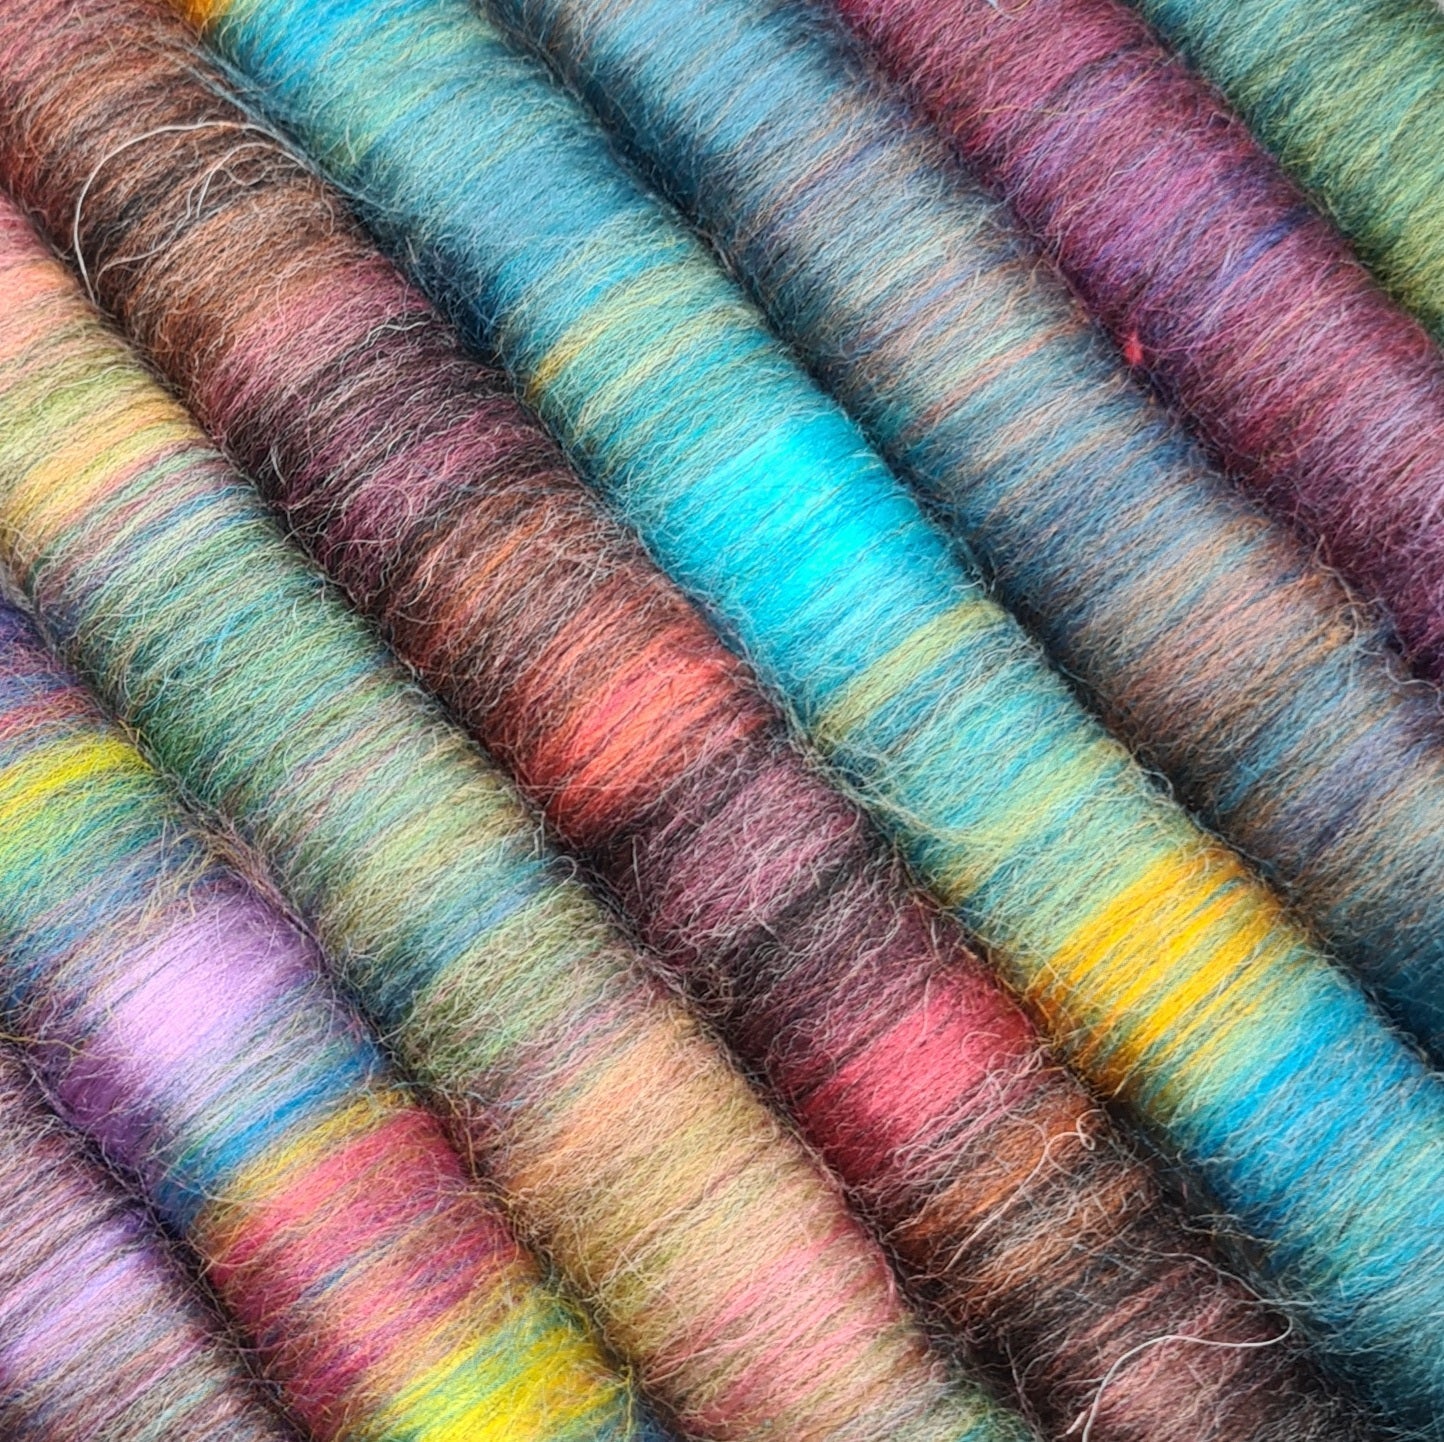 Rolags (or Punis) for spinning, Beaulieu, Wool and Bamboo